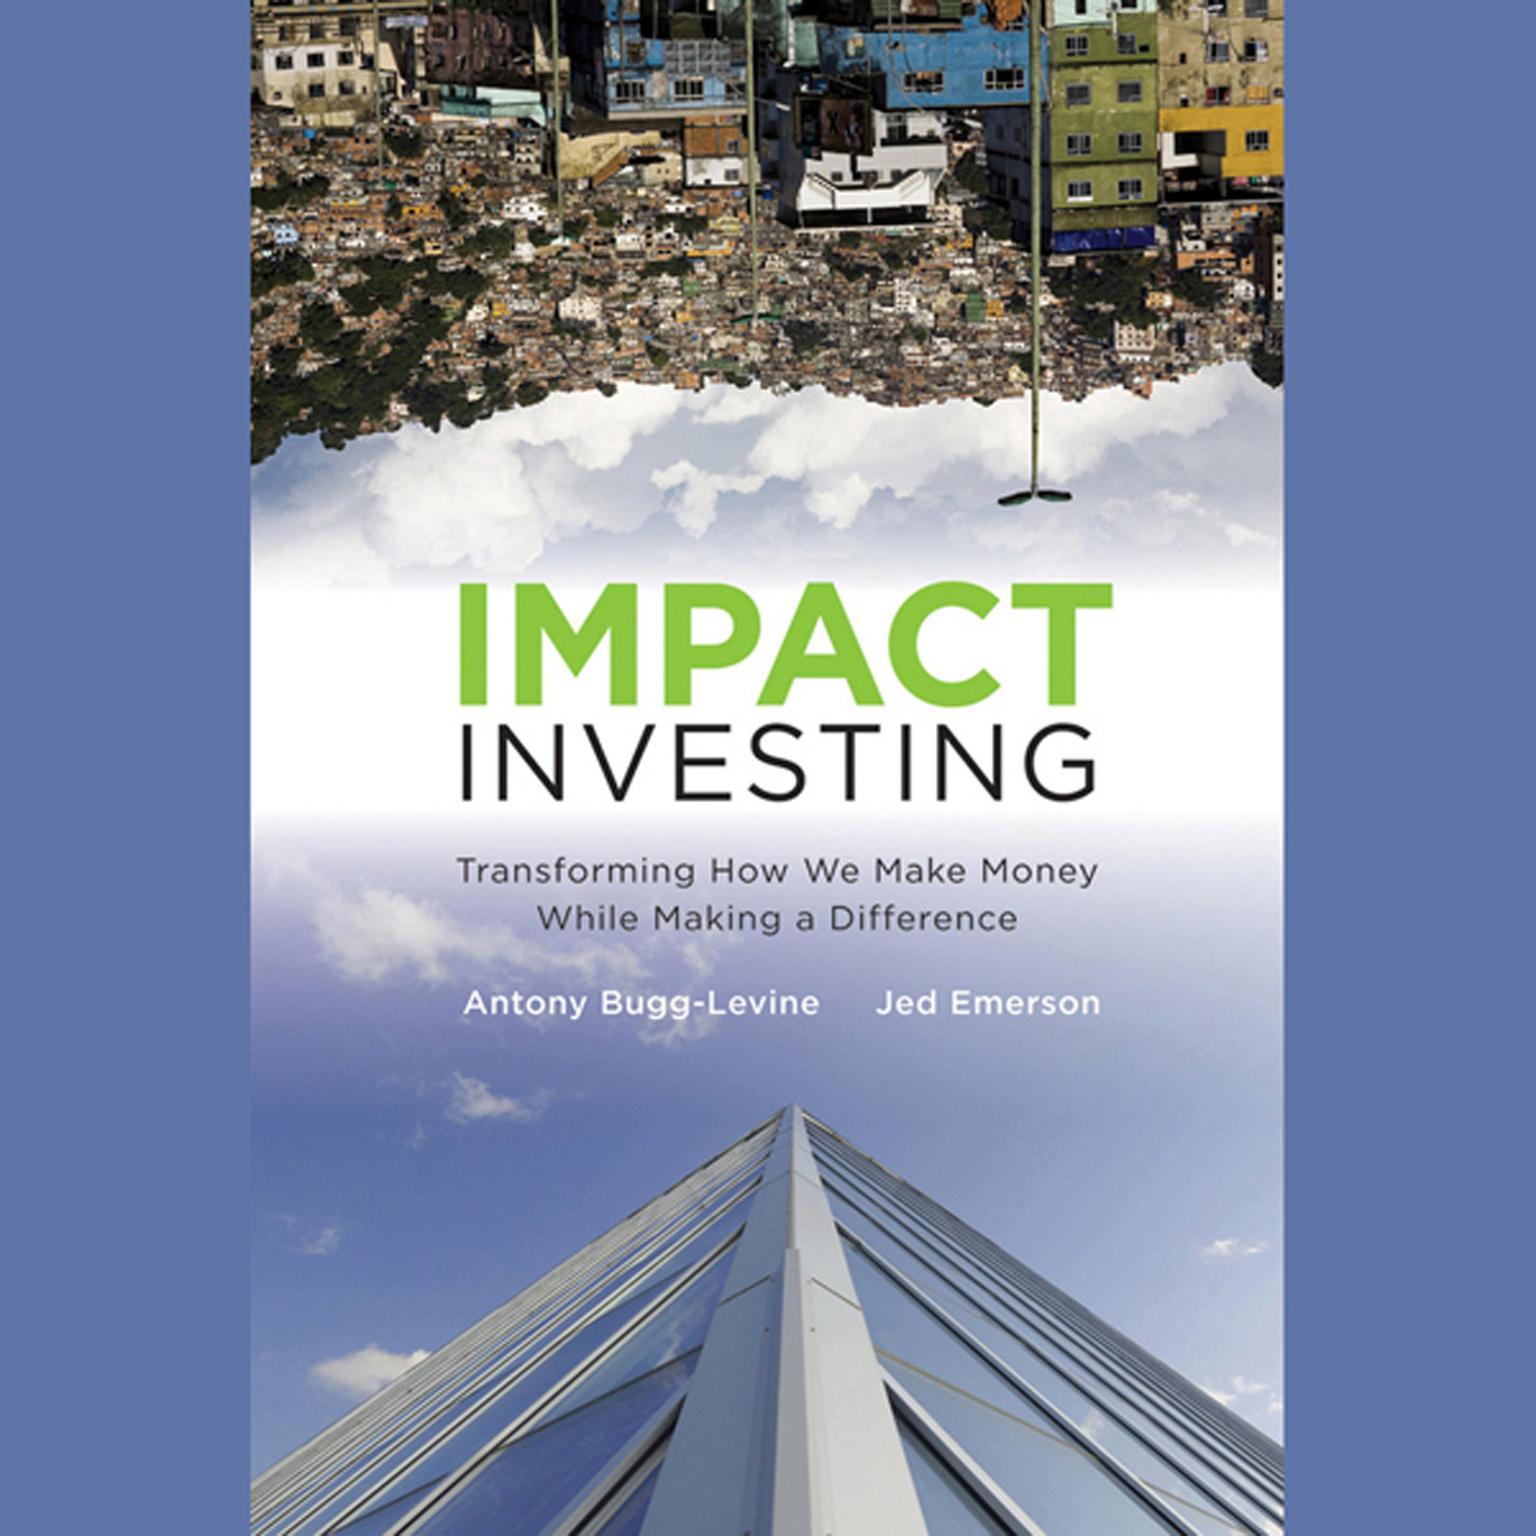 Impact Investing: Transforming How We Make Money While Making a Difference Audiobook, by Antony Bugg-Levine